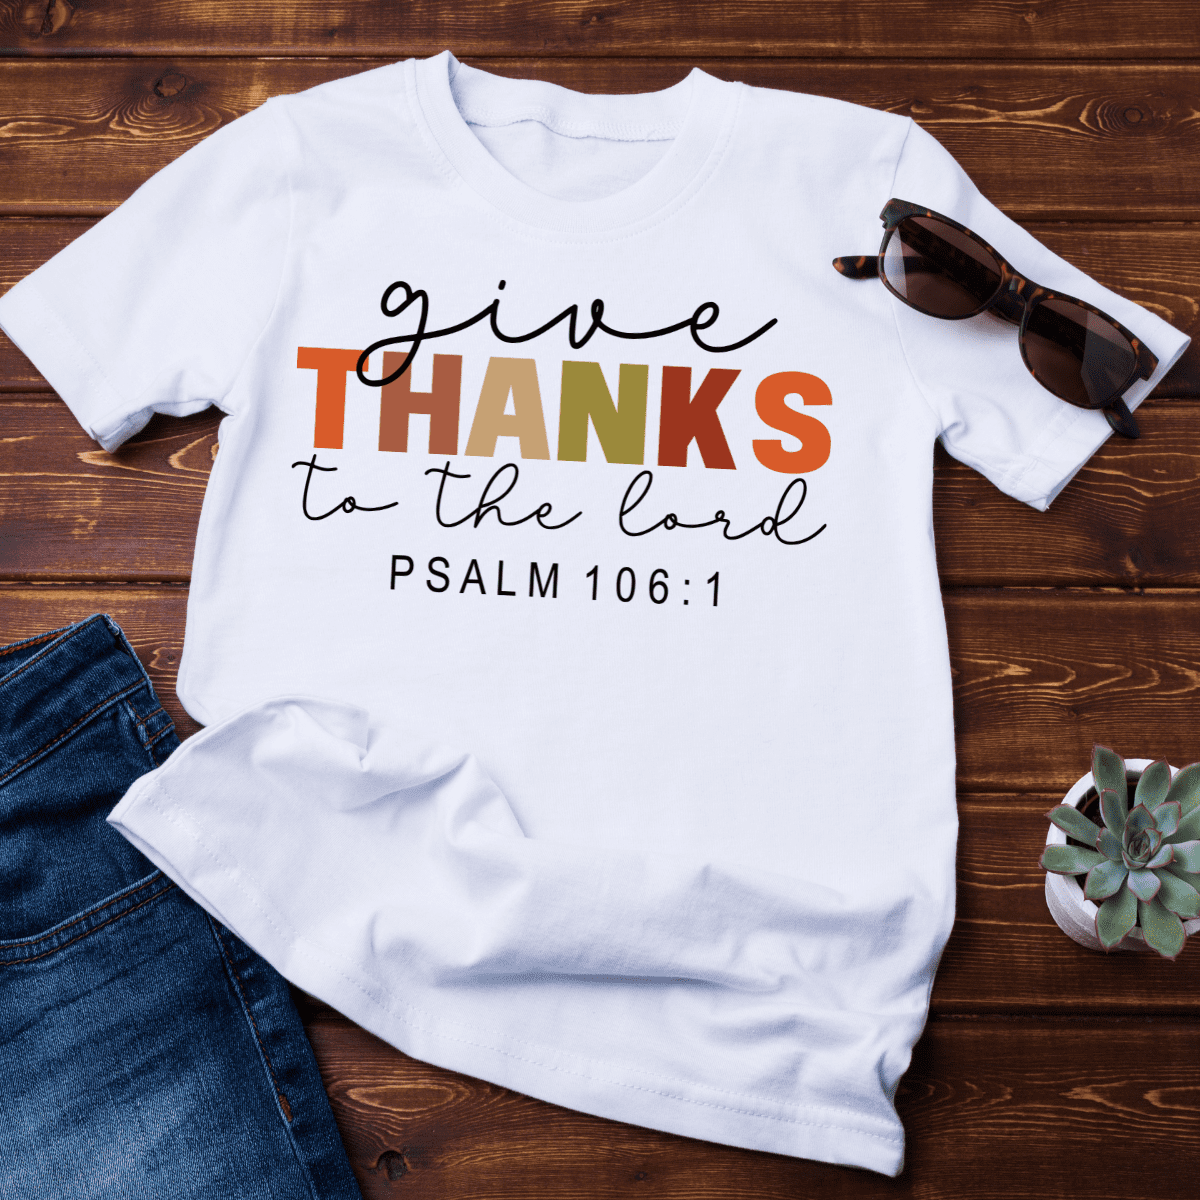 Give Thanks To The Lord(Psalm 106:1)